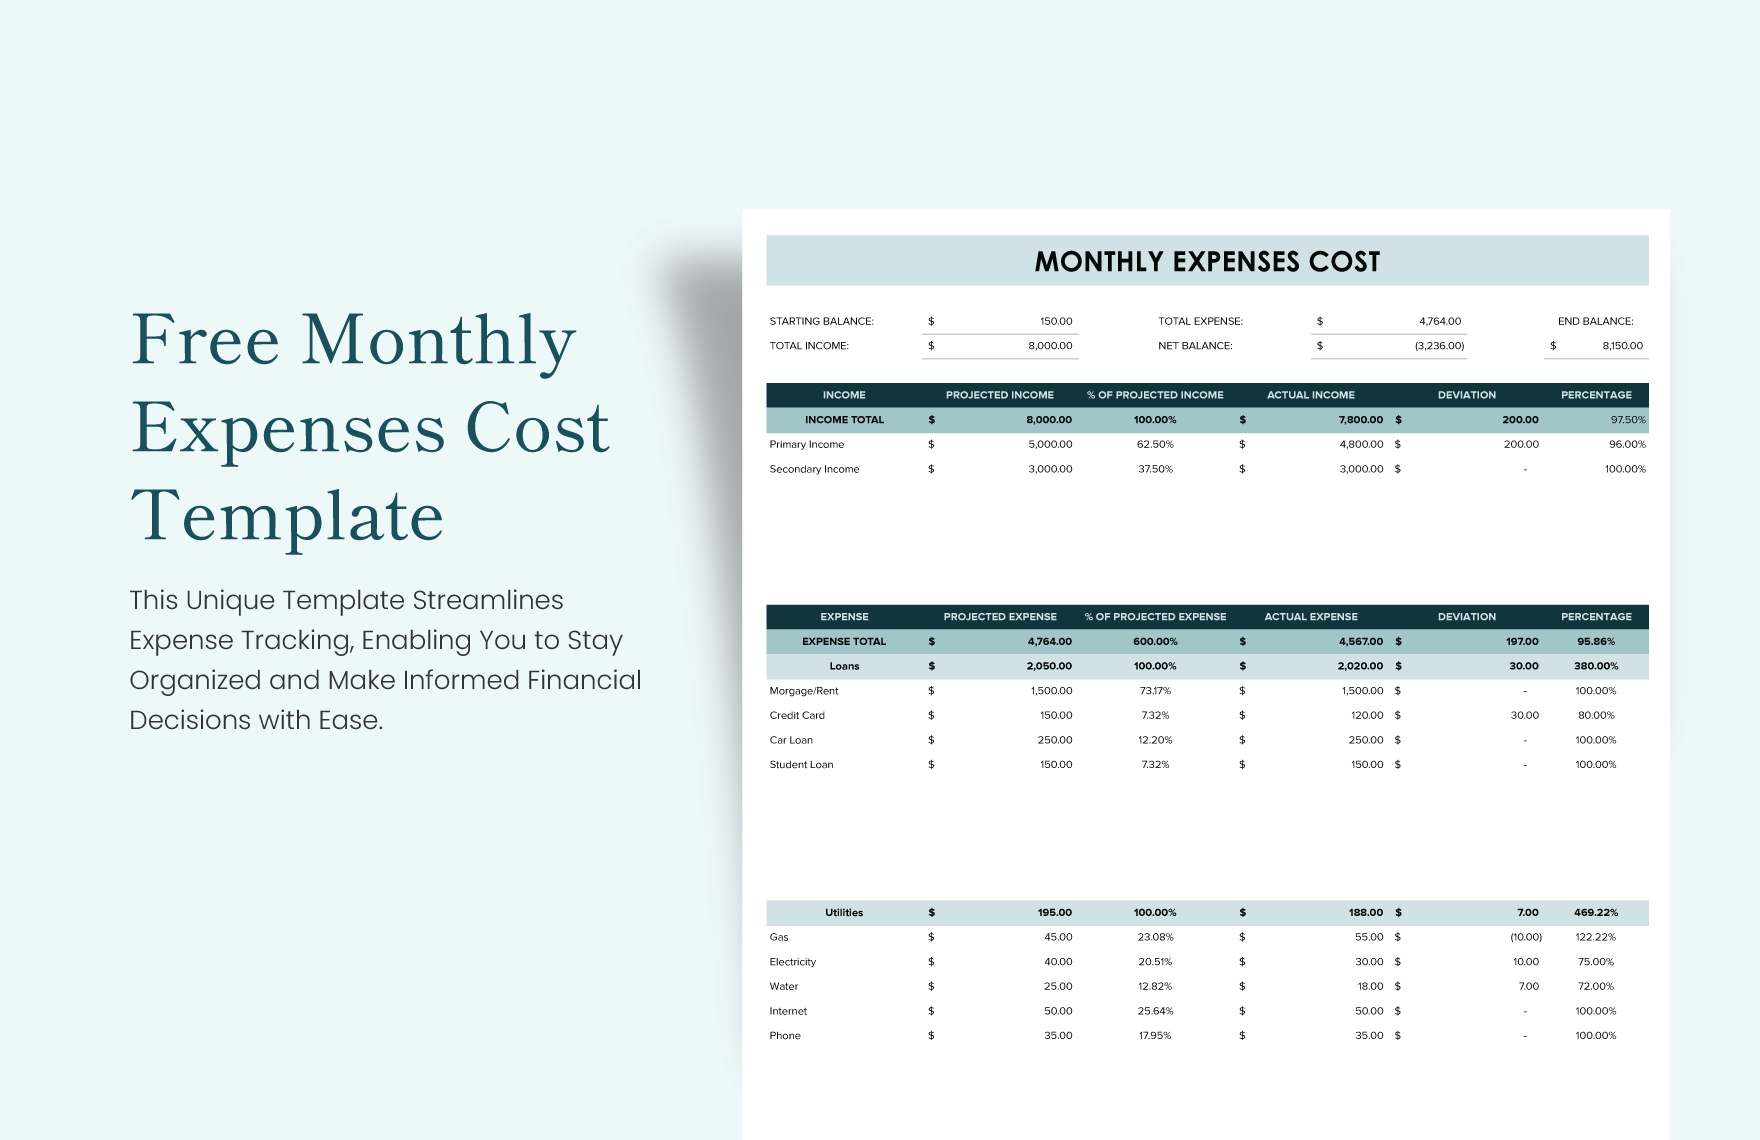 Free Monthly Expenses Cost Template